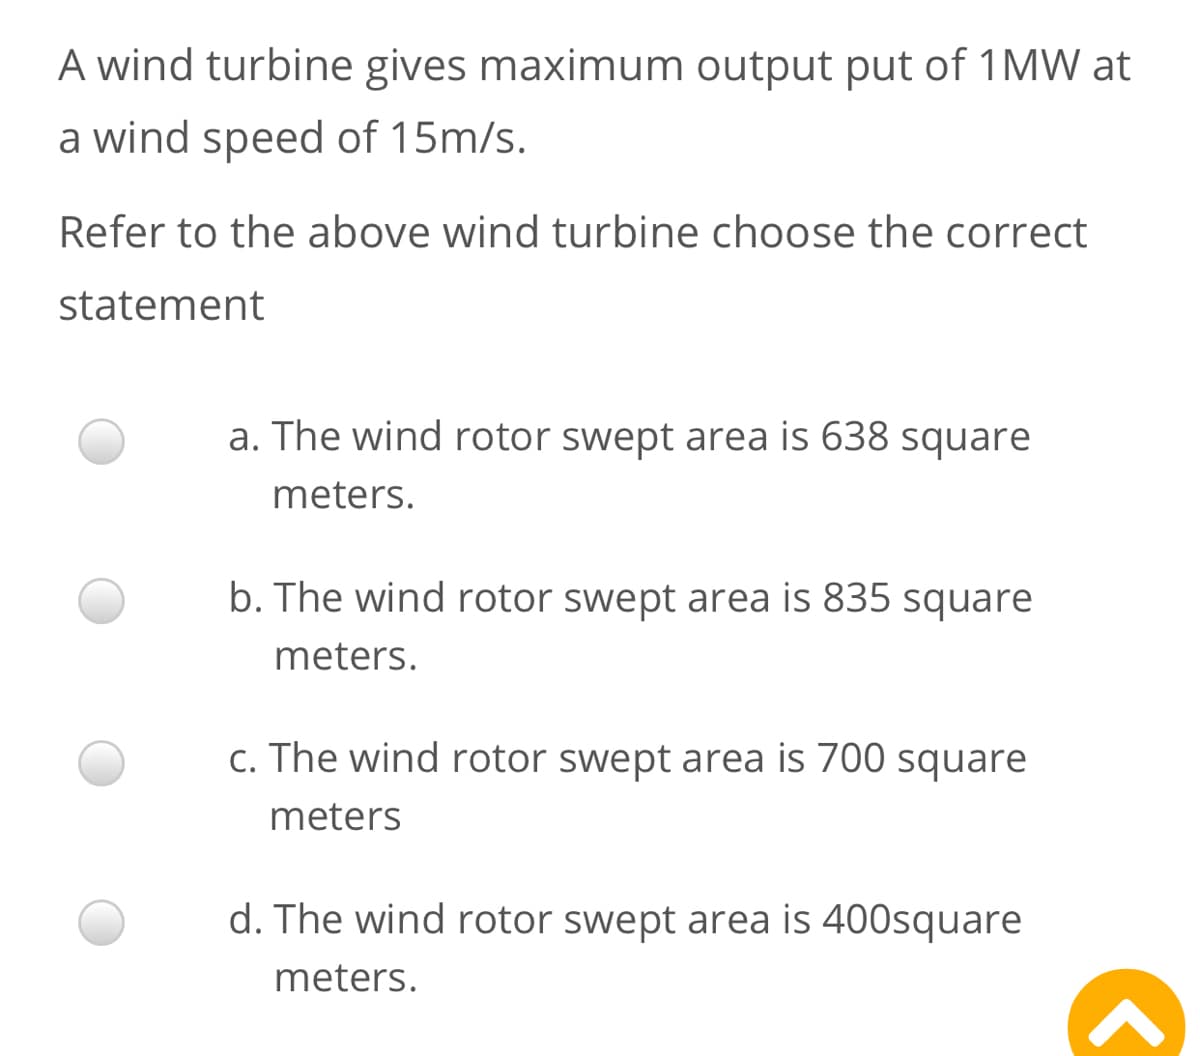 A wind turbine gives maximum output put of 1MW at
a wind speed of 15m/s.
Refer to the above wind turbine choose the correct
statement
a. The wind rotor swept area is 638 square
meters.
b. The wind rotor swept area is 835 square
meters.
c. The wind rotor swept area is 700 square
meters
d. The wind rotor swept area is 400square
meters.
